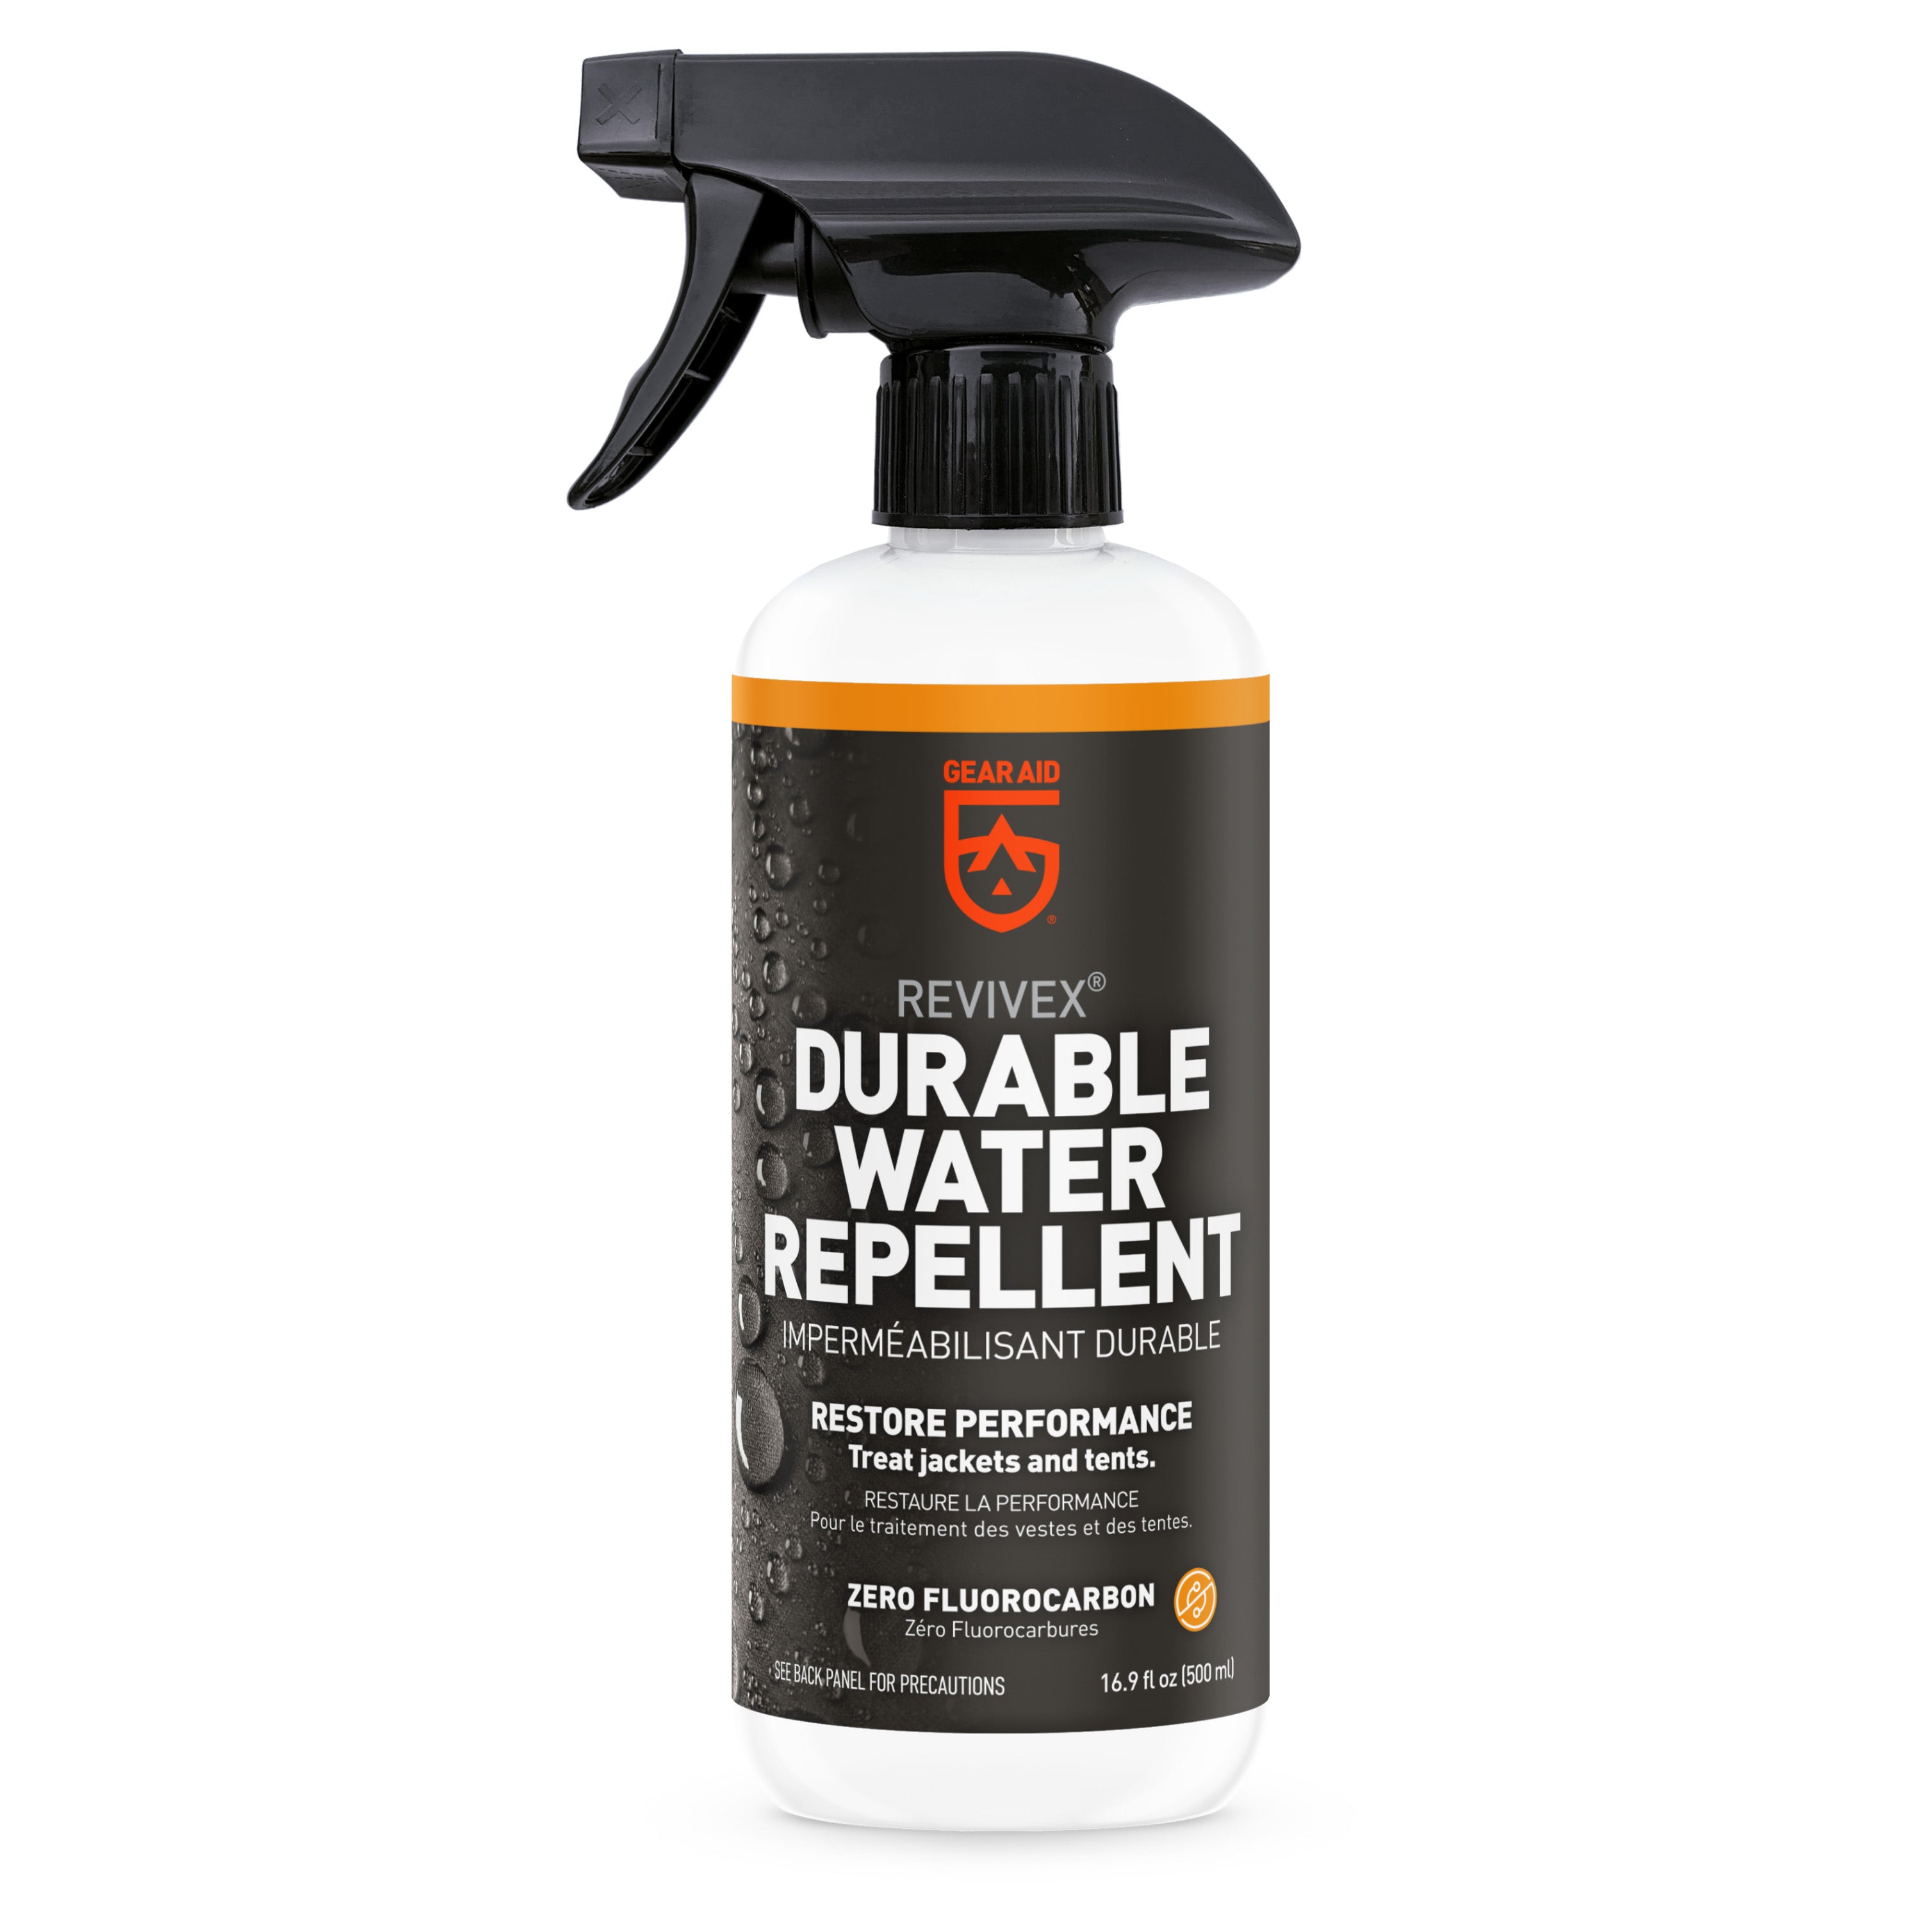 DWR - Durable Water Repellent and you — Outdoor Gear Repair - The